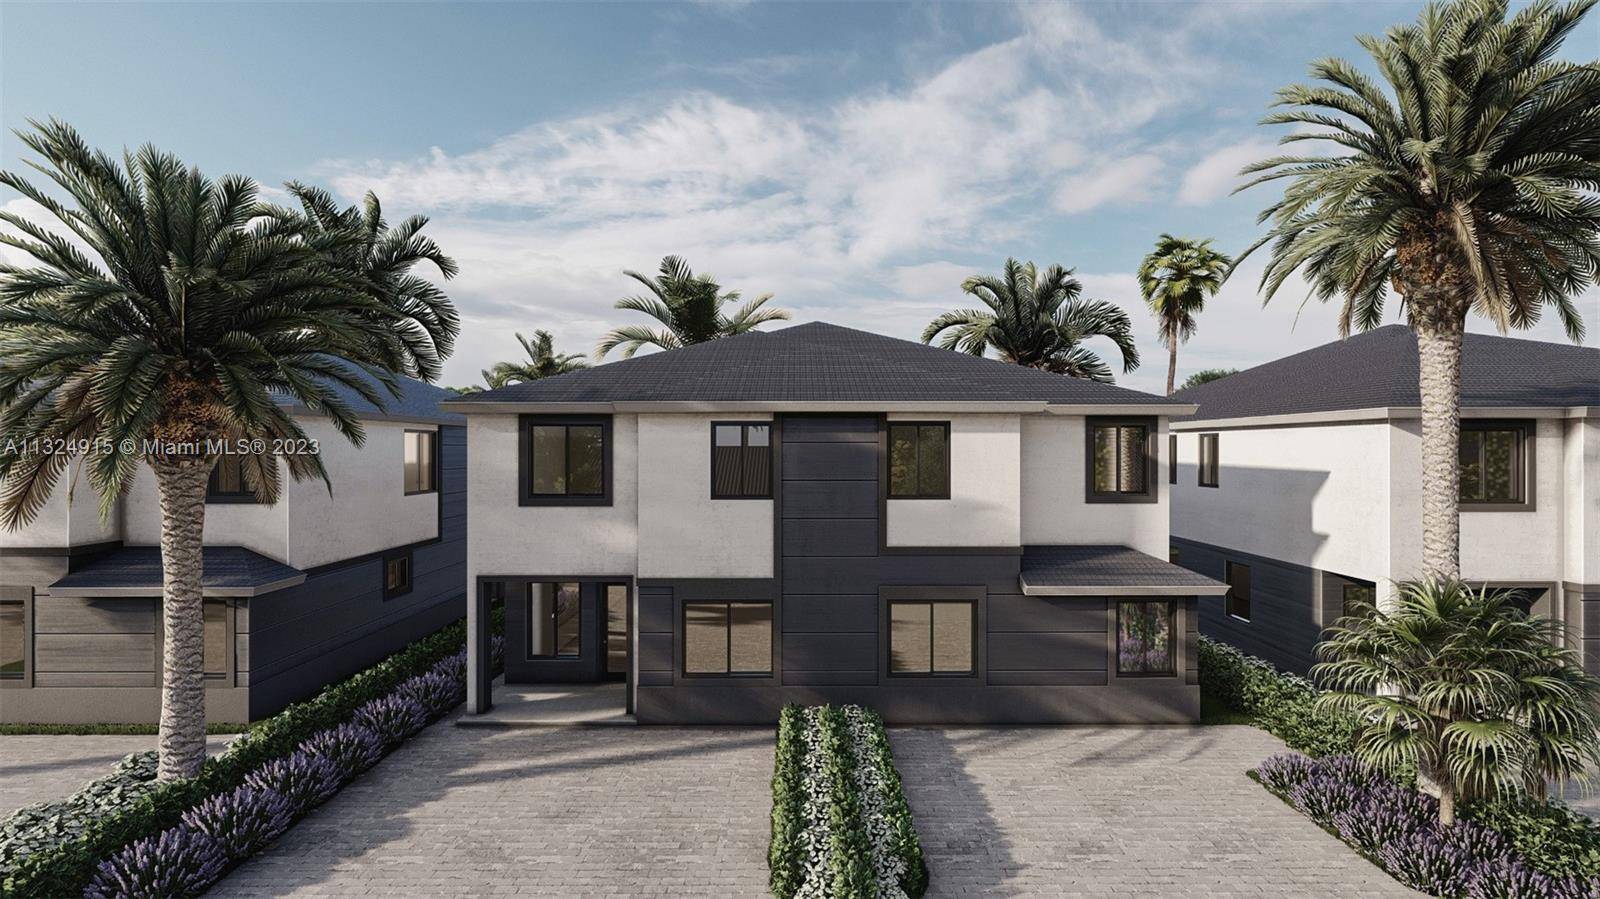 Welcome to Chloe s Estates Sonia Model, a brand new very spacious 2 story twin home in Miami FL !